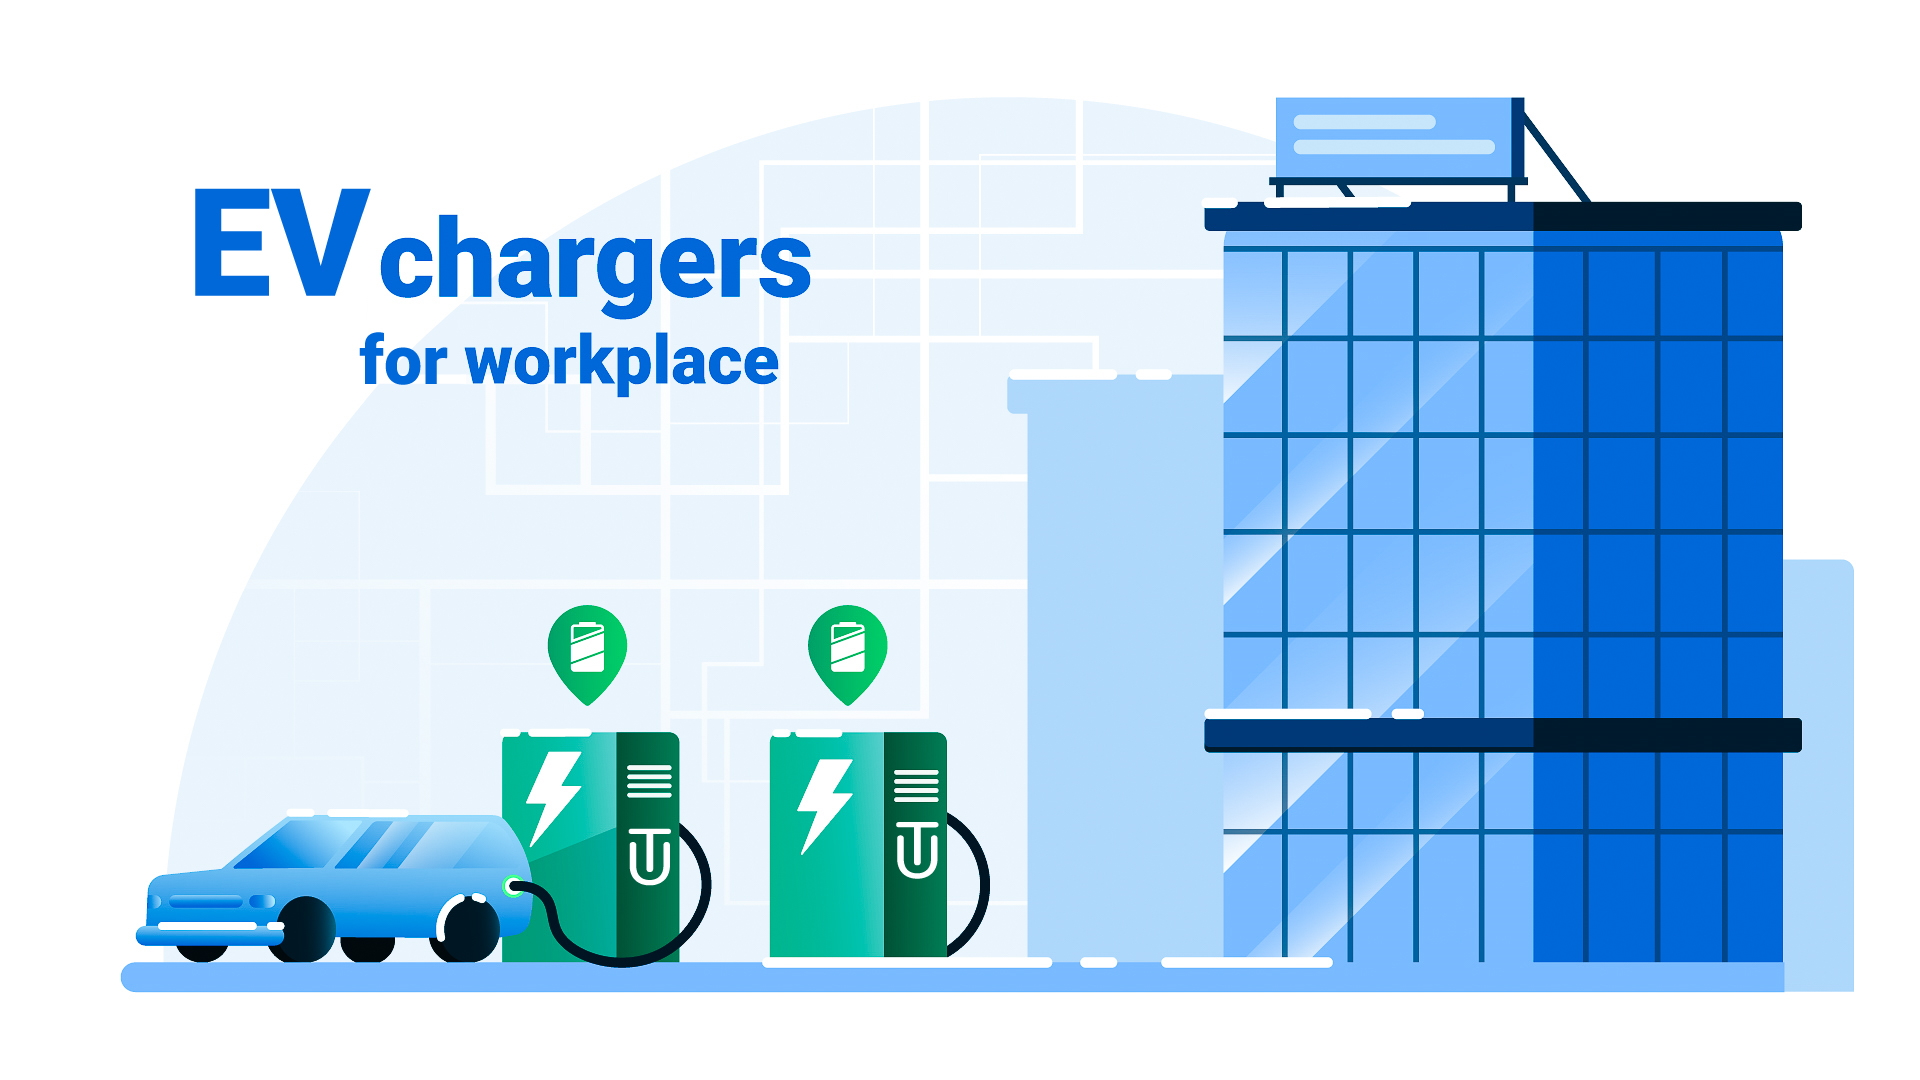 Workplace EV charging can have benefits for both the business and employees